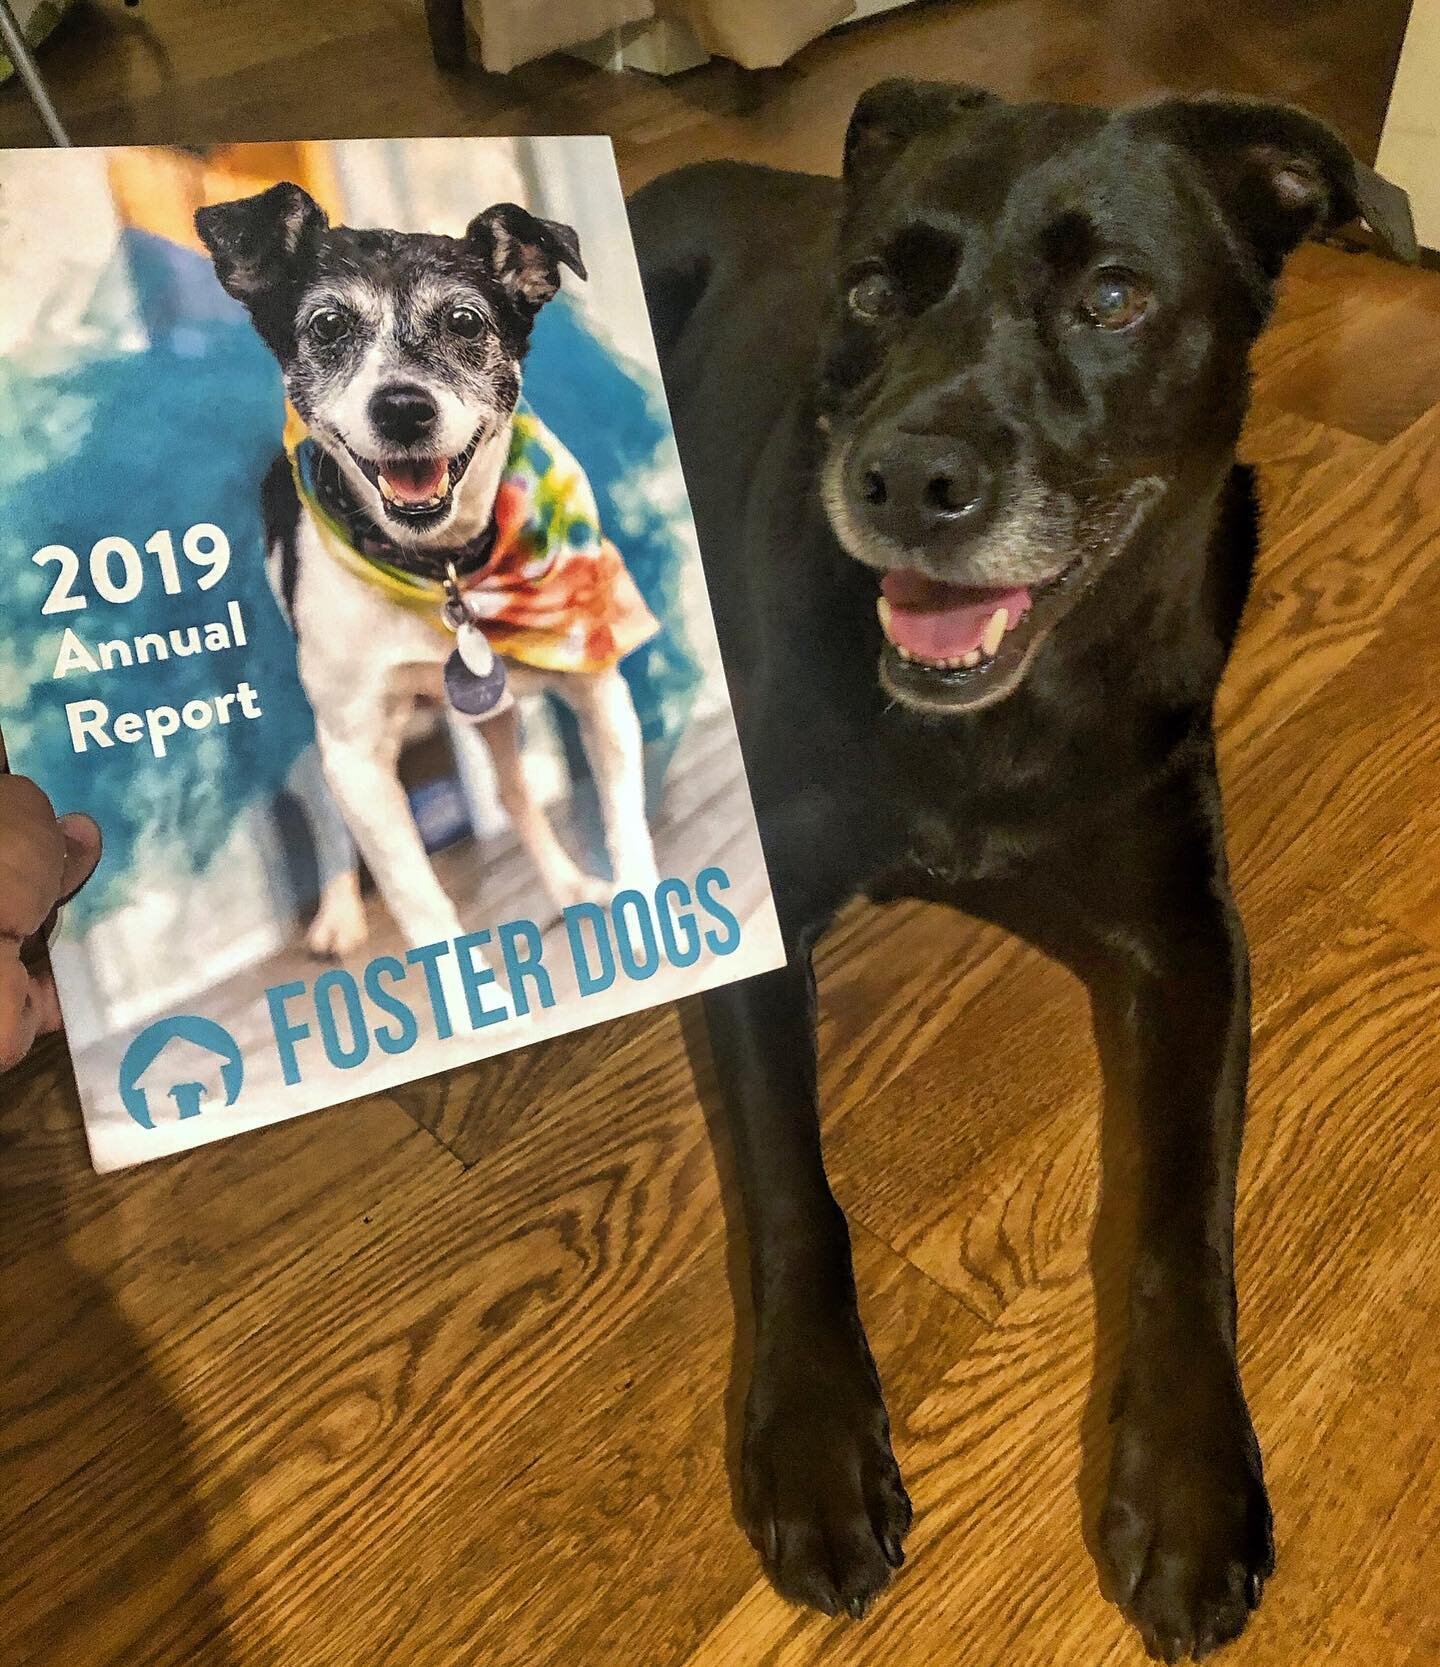 The @fosterdogs 2019 Annual Report made me smile so big. 😁❤️ I've known the founder of this amazing organization for years, and I can say that she's truly created an organization that embodies her own positive, determined and compassionate attitude.